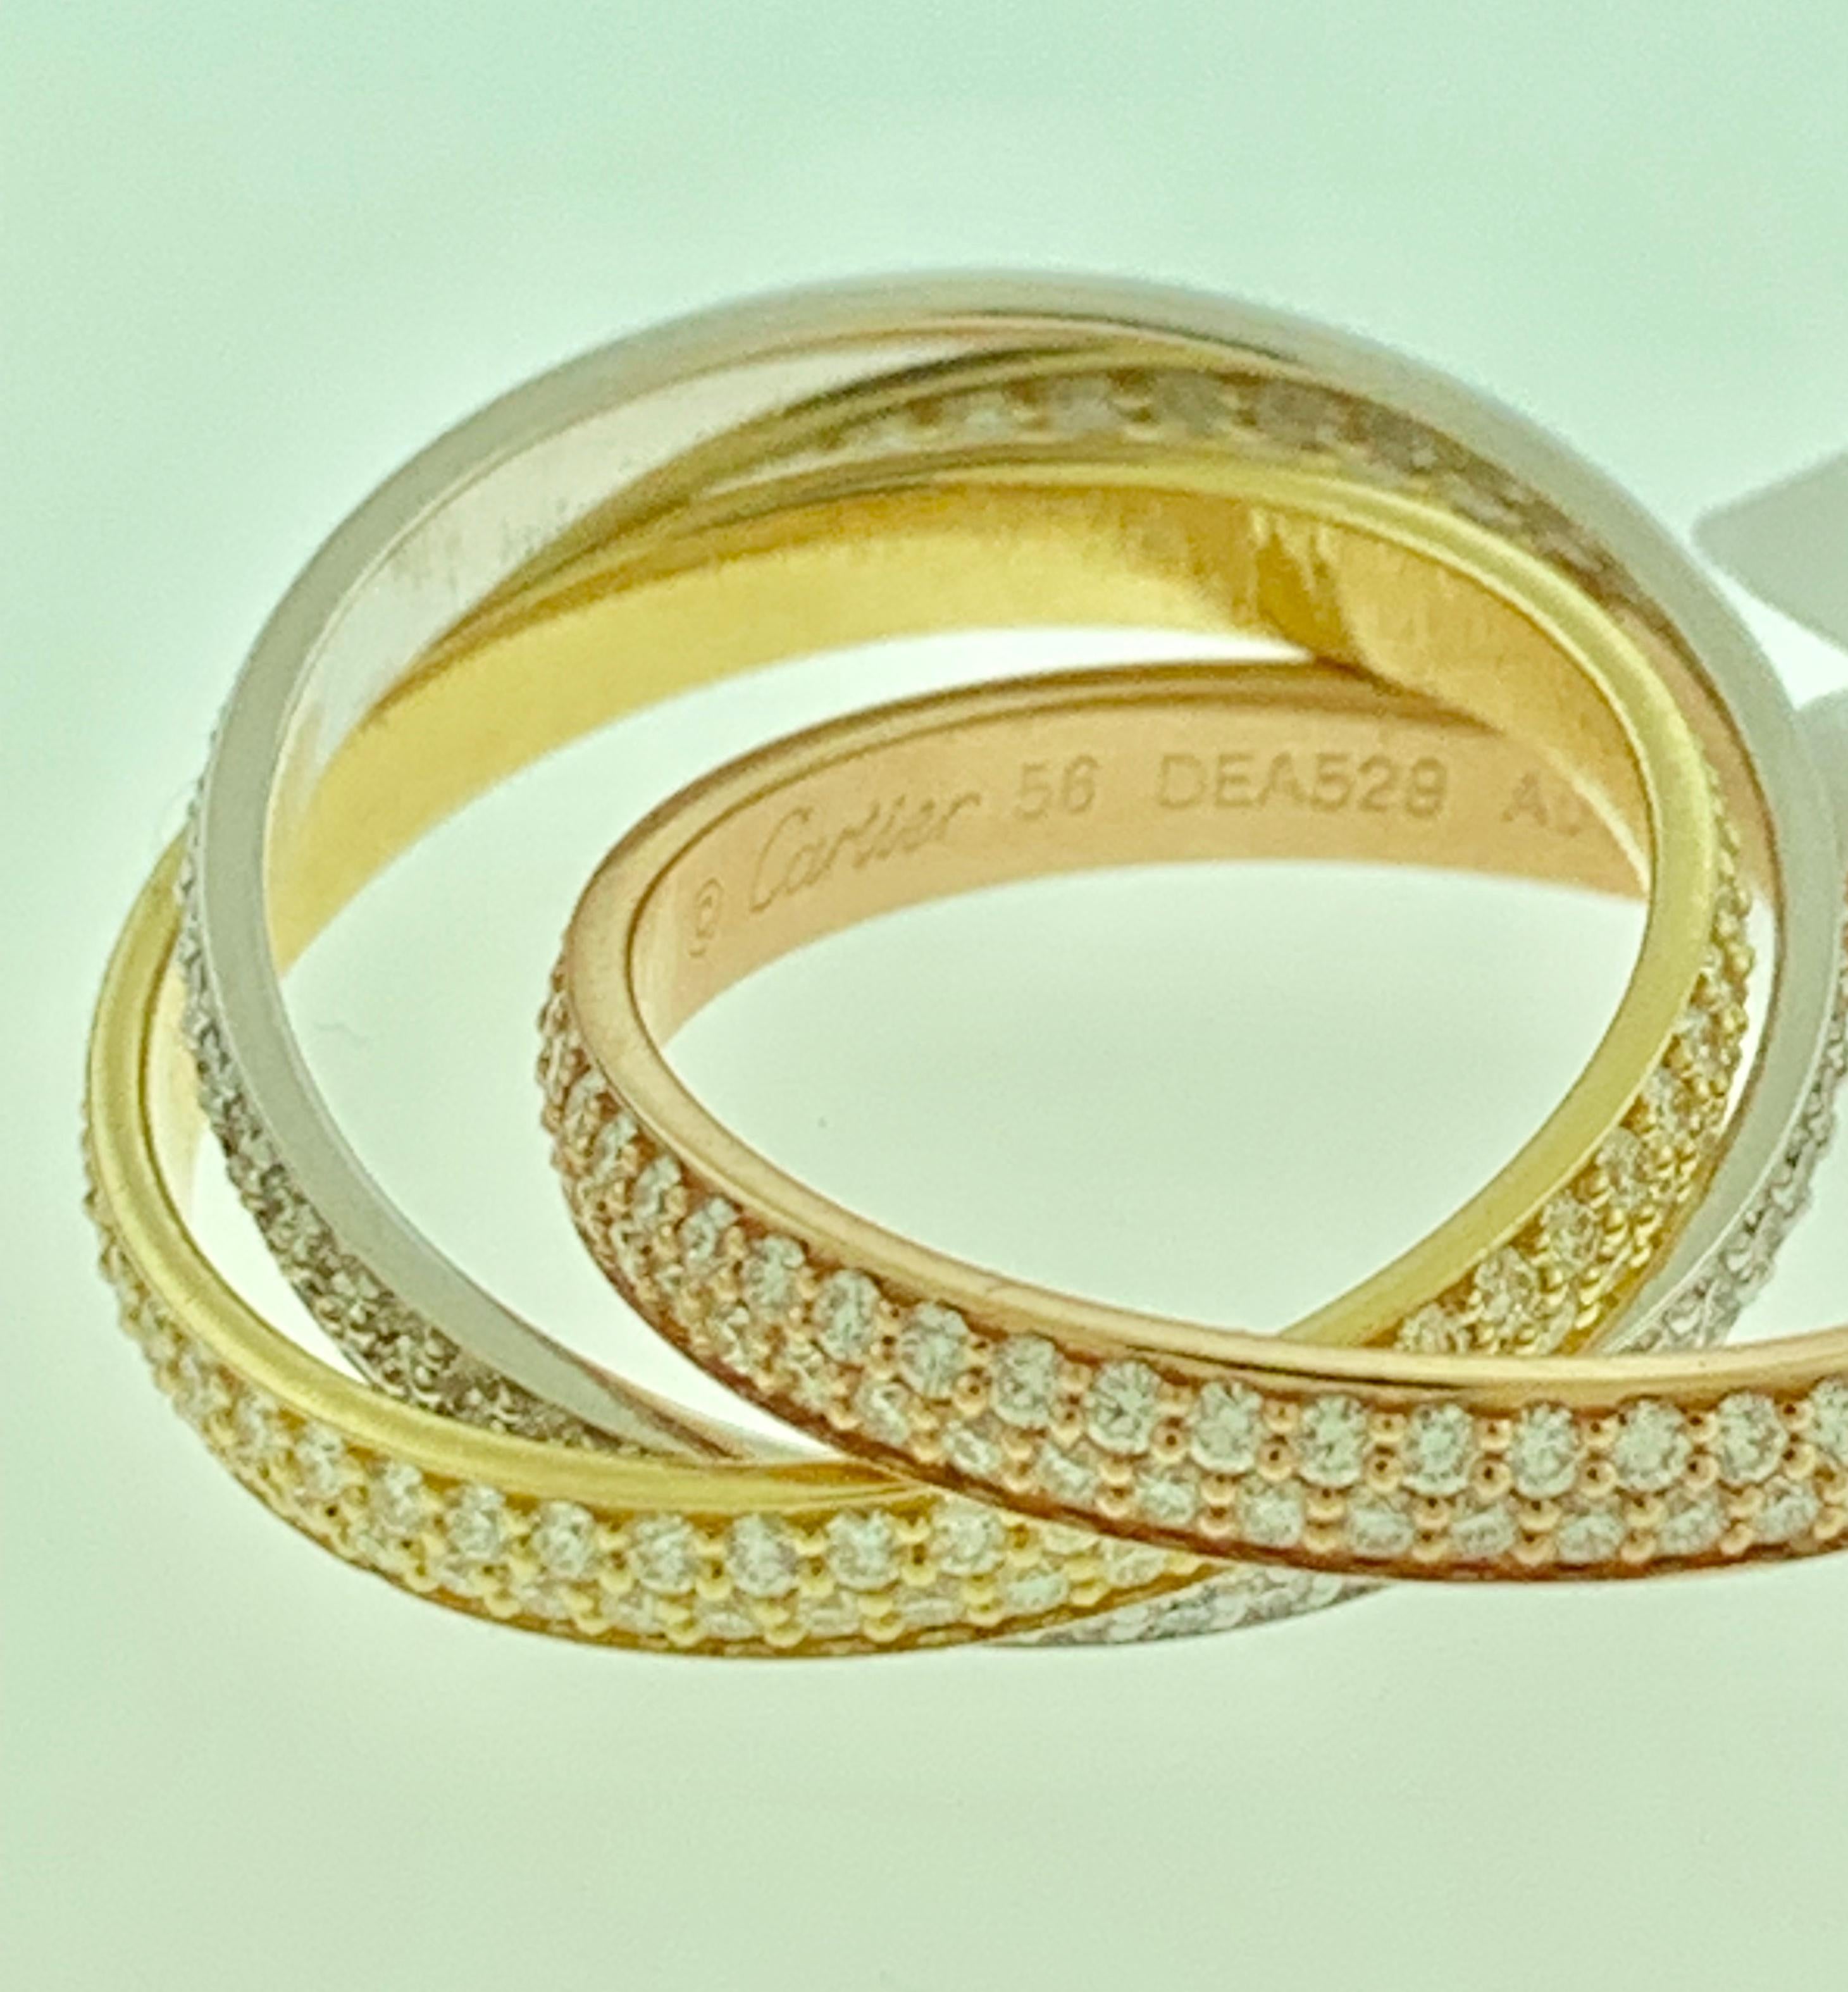 Round Cut Trinity Rings, Small Model White Gold, Yellow Gold, Pink Gold, Diamonds